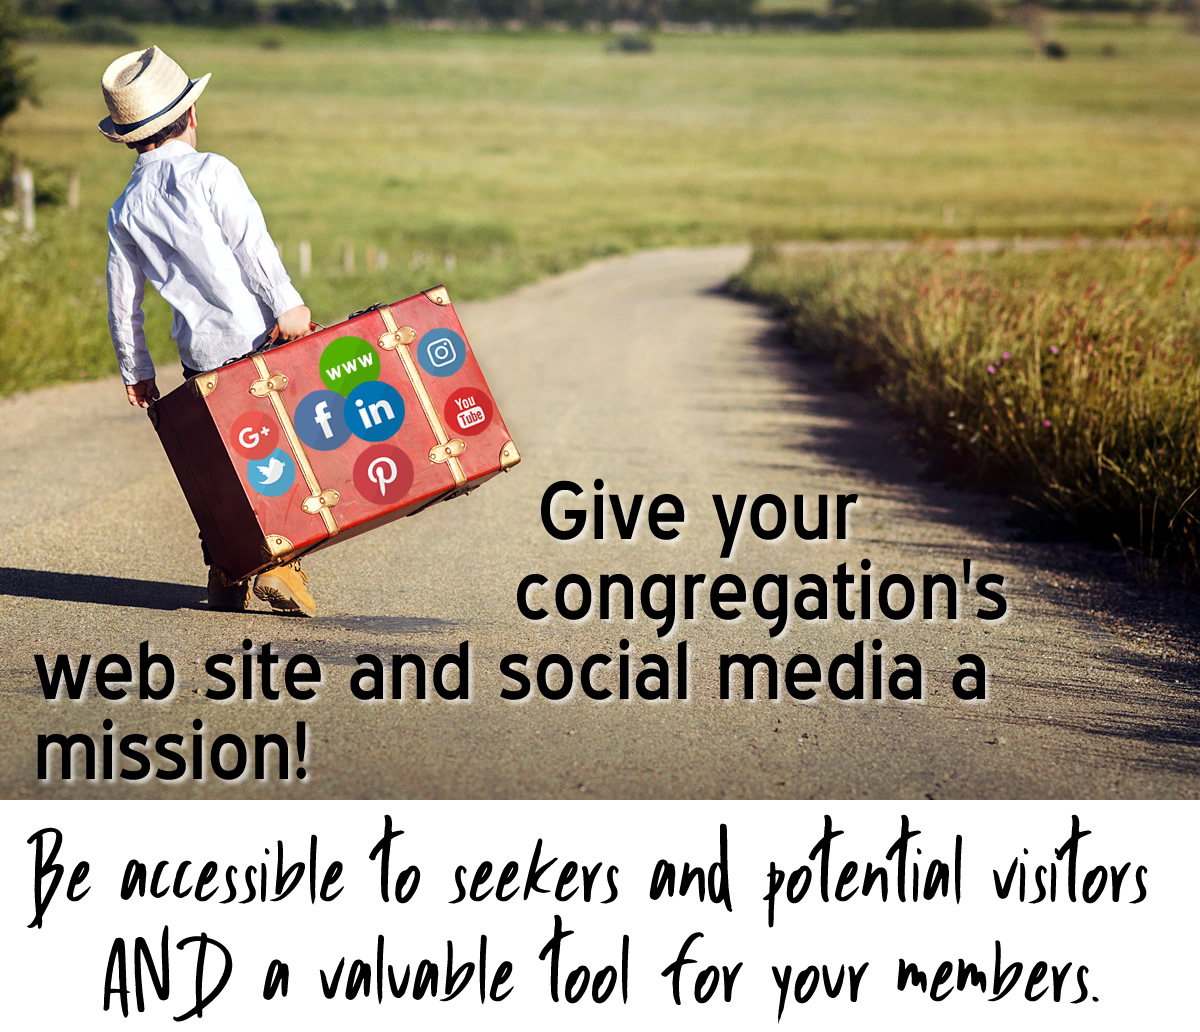 Give your congregation's 
web site and social media a mission! Be accessible to seekers and potential visitors AND a valuable tool for your members.